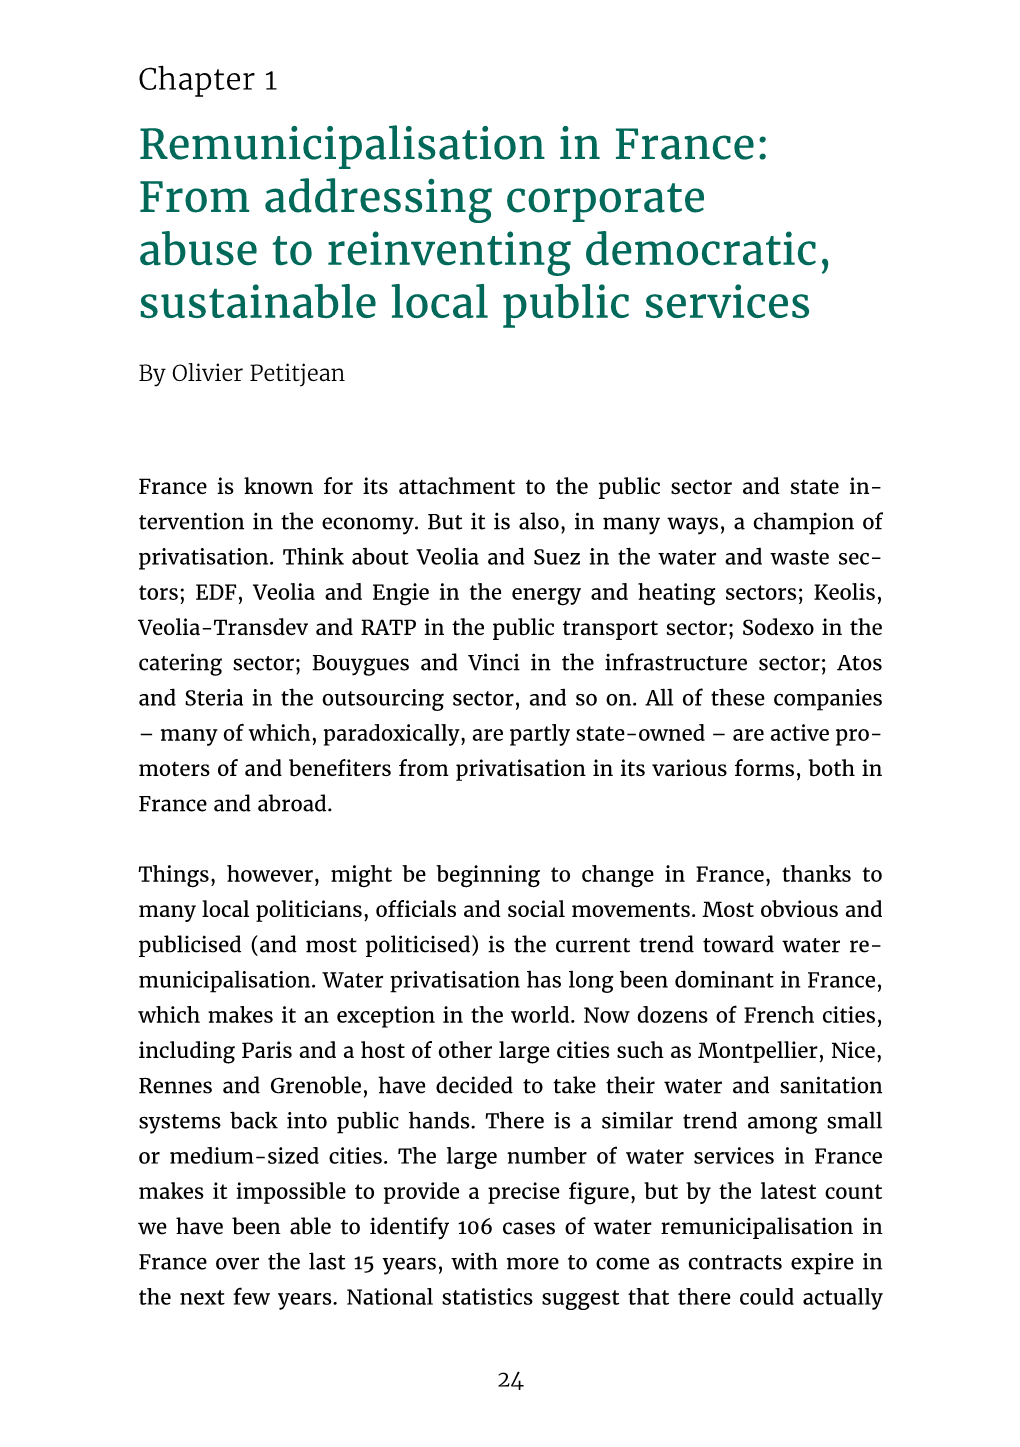 Remunicipalisation in France: from Addressing Corporate Abuse to Reinventing Democratic, Sustainable Local Public Services